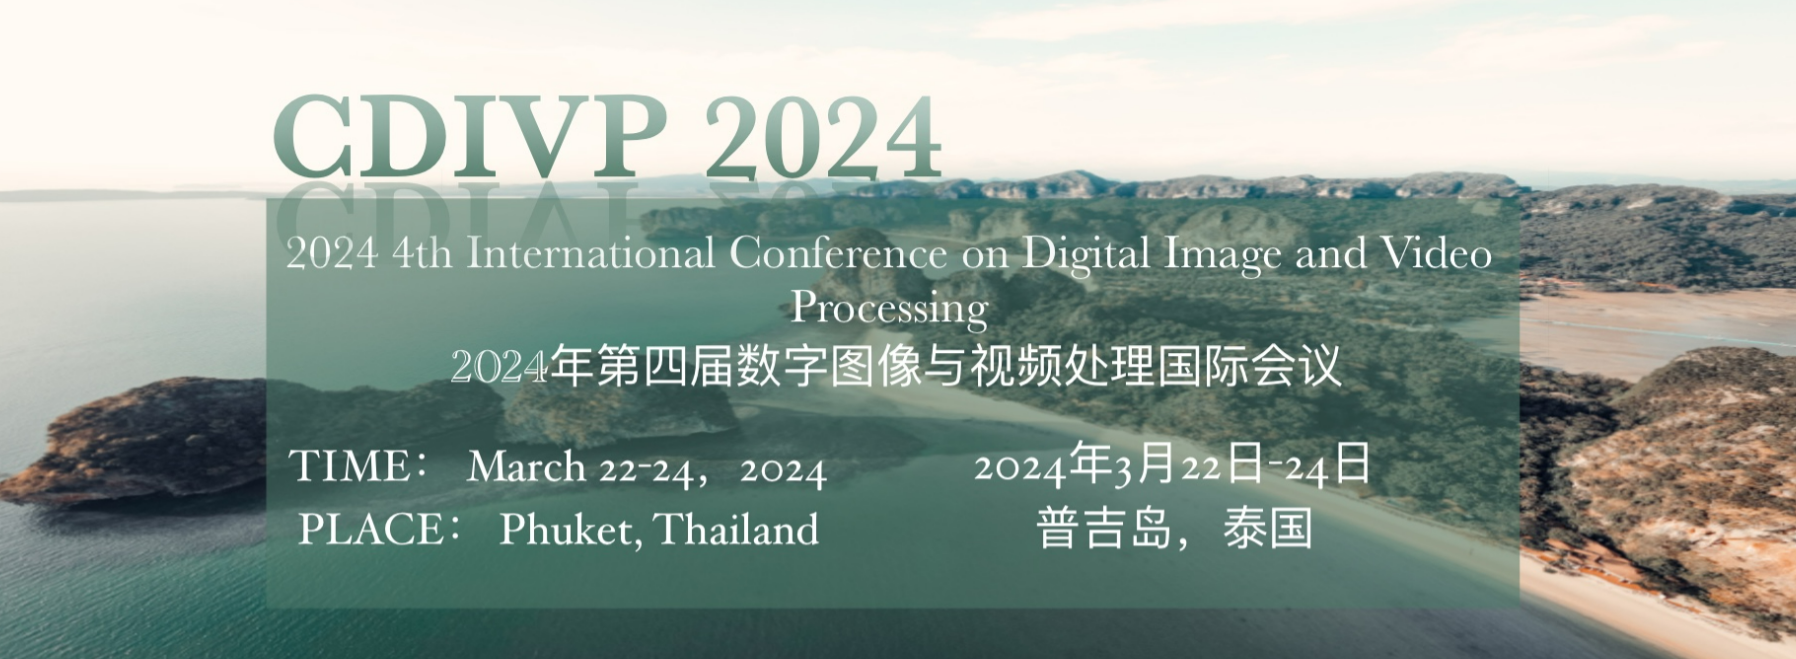 2024 4th International Conference on Digital Image and Video Processing (CDIVP 2024) -EI Compendex, Phuket, Thailand